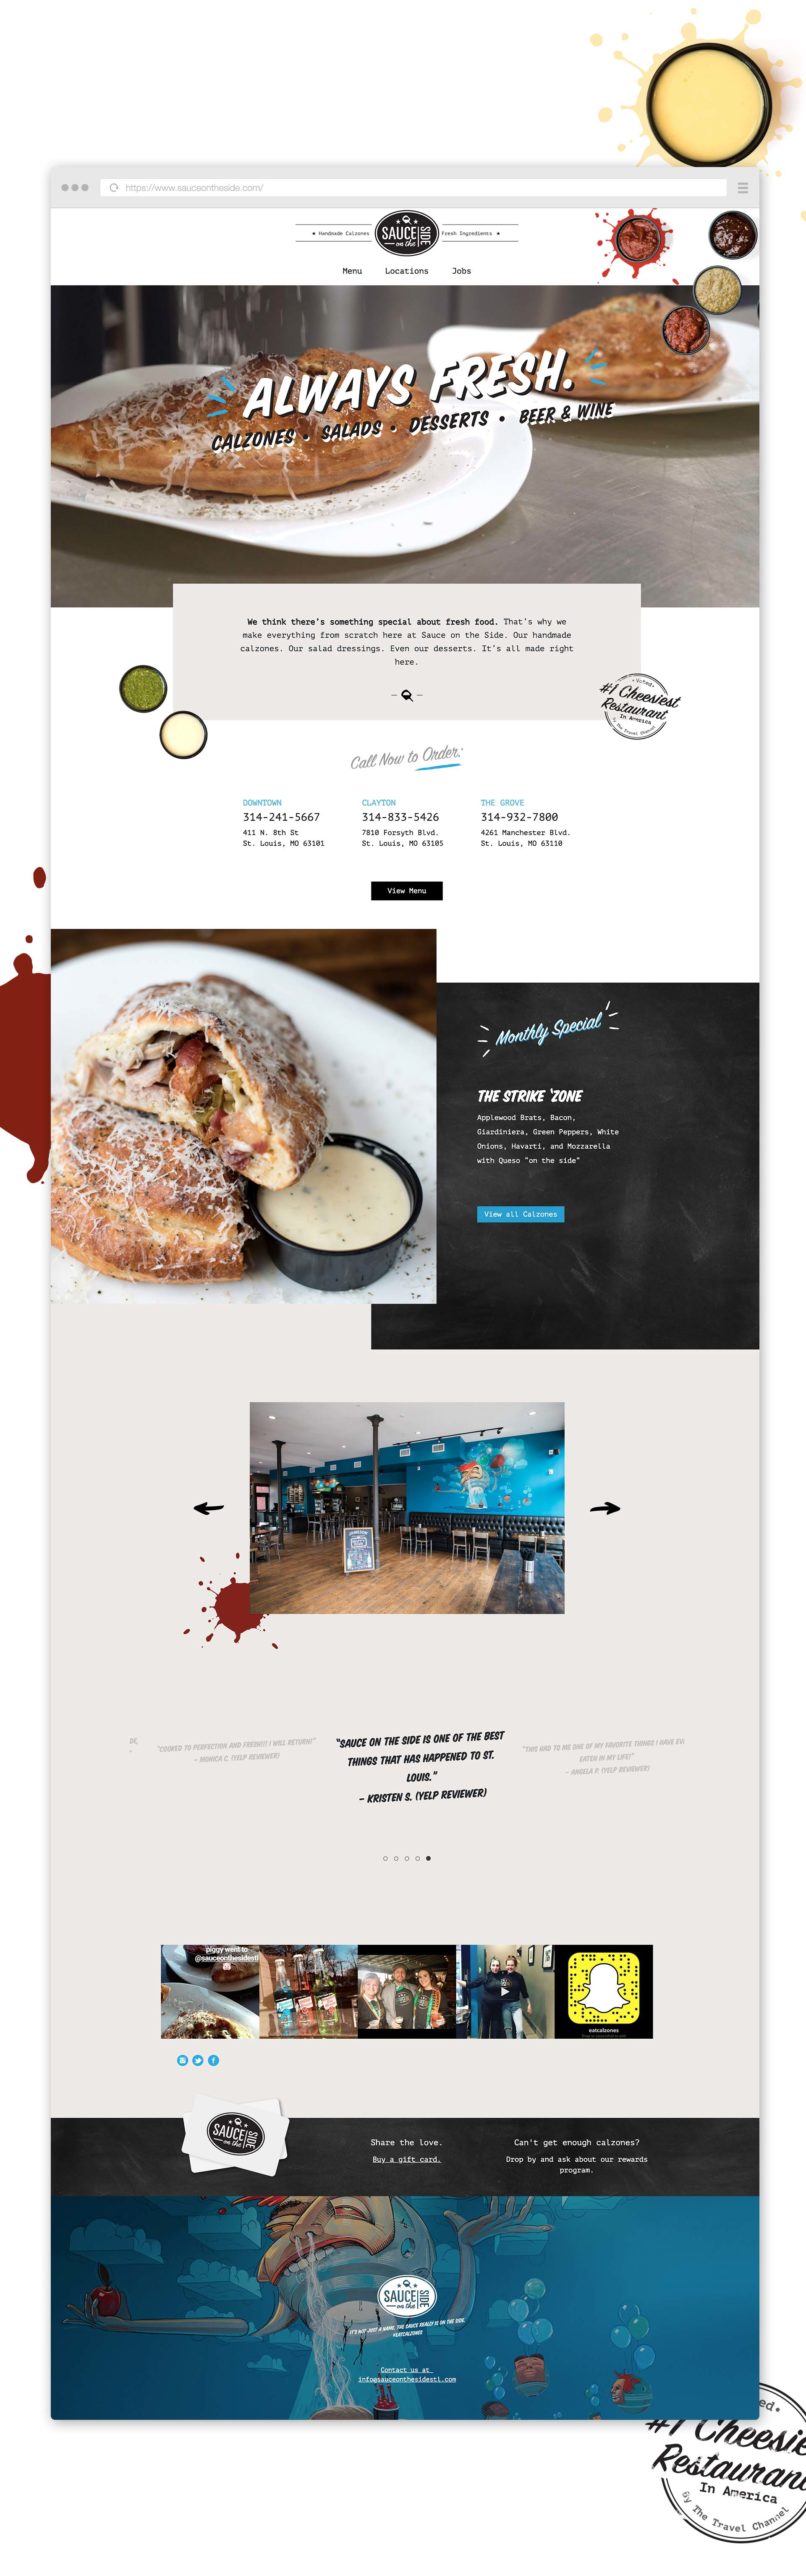 Sauce on the Side - Website Design -Homepage